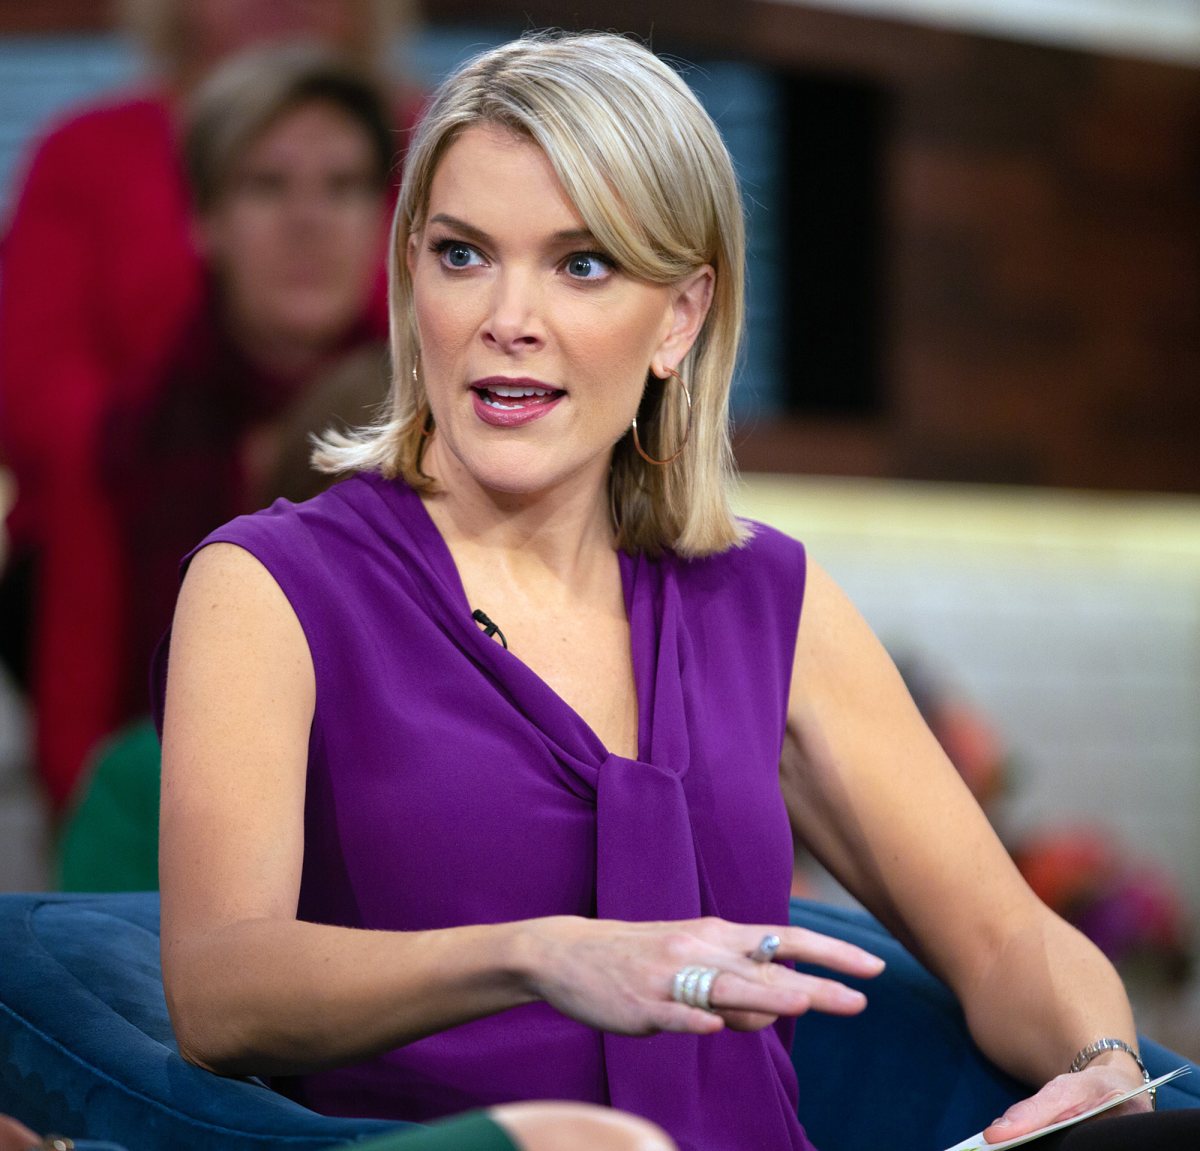 Megyn Kelly Apologizes To Coworkers For Blackface Remarks